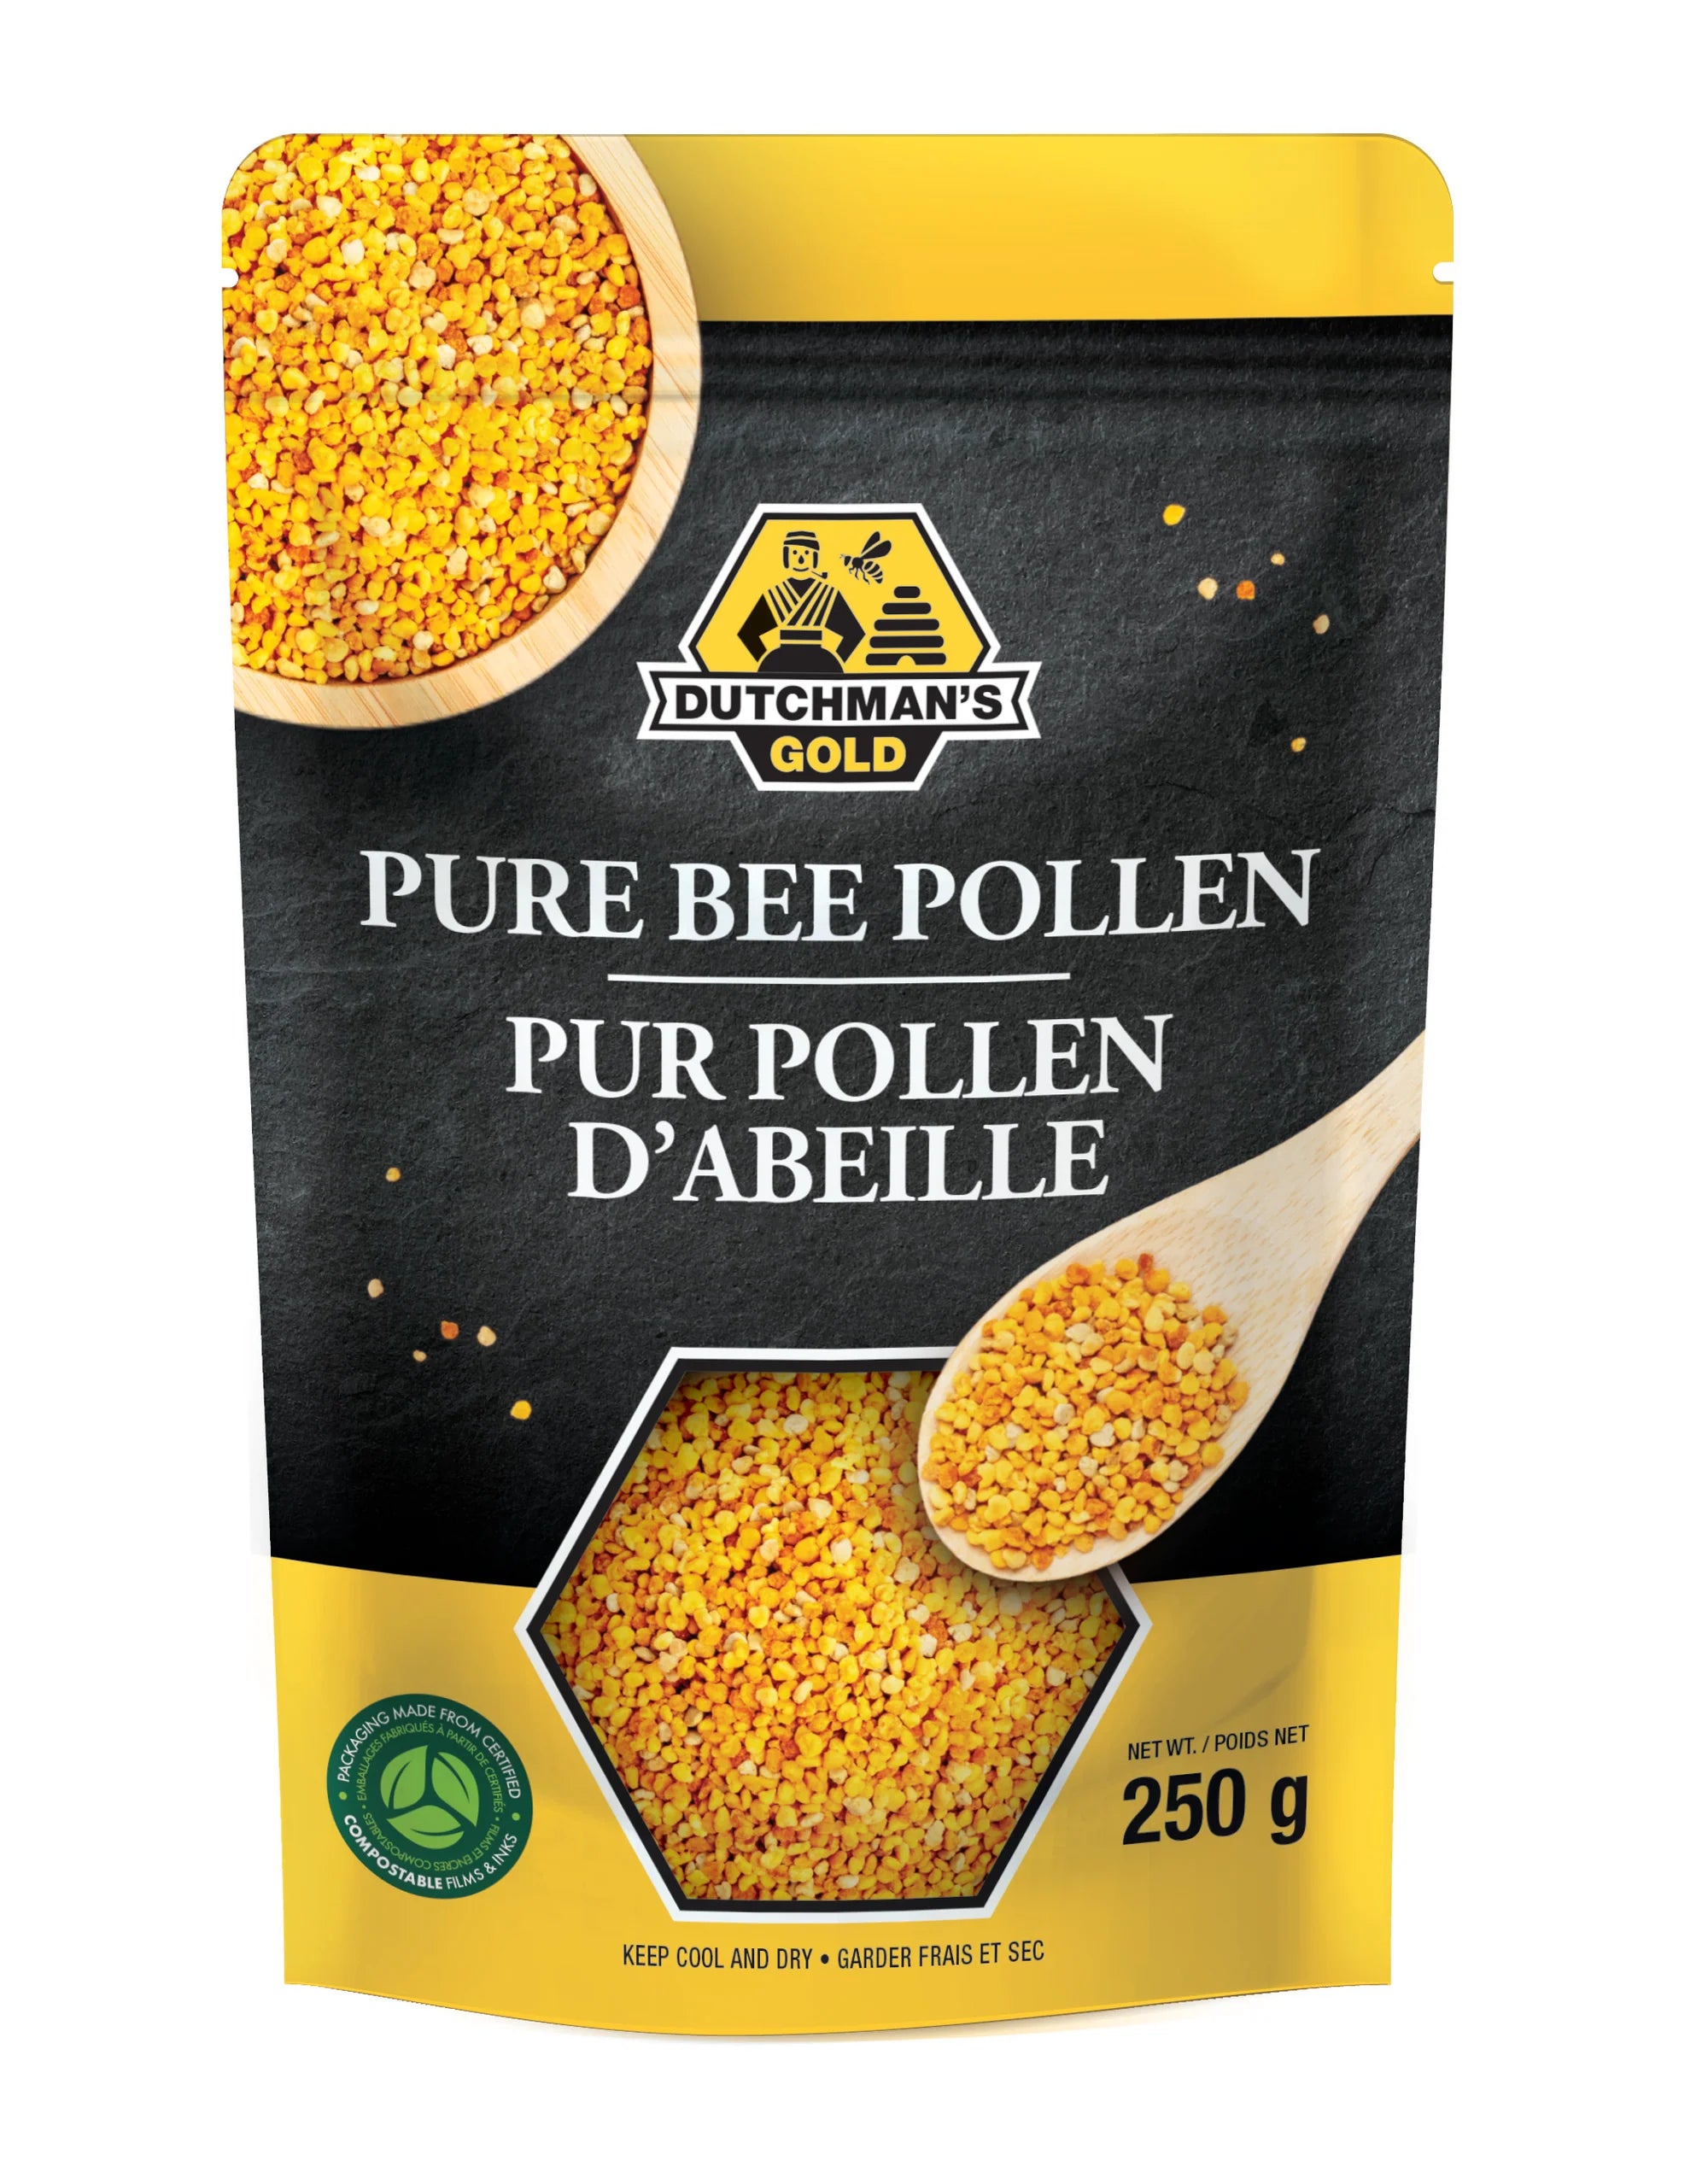 Pure Bee Pollen by Dutchman's Gold, 250g